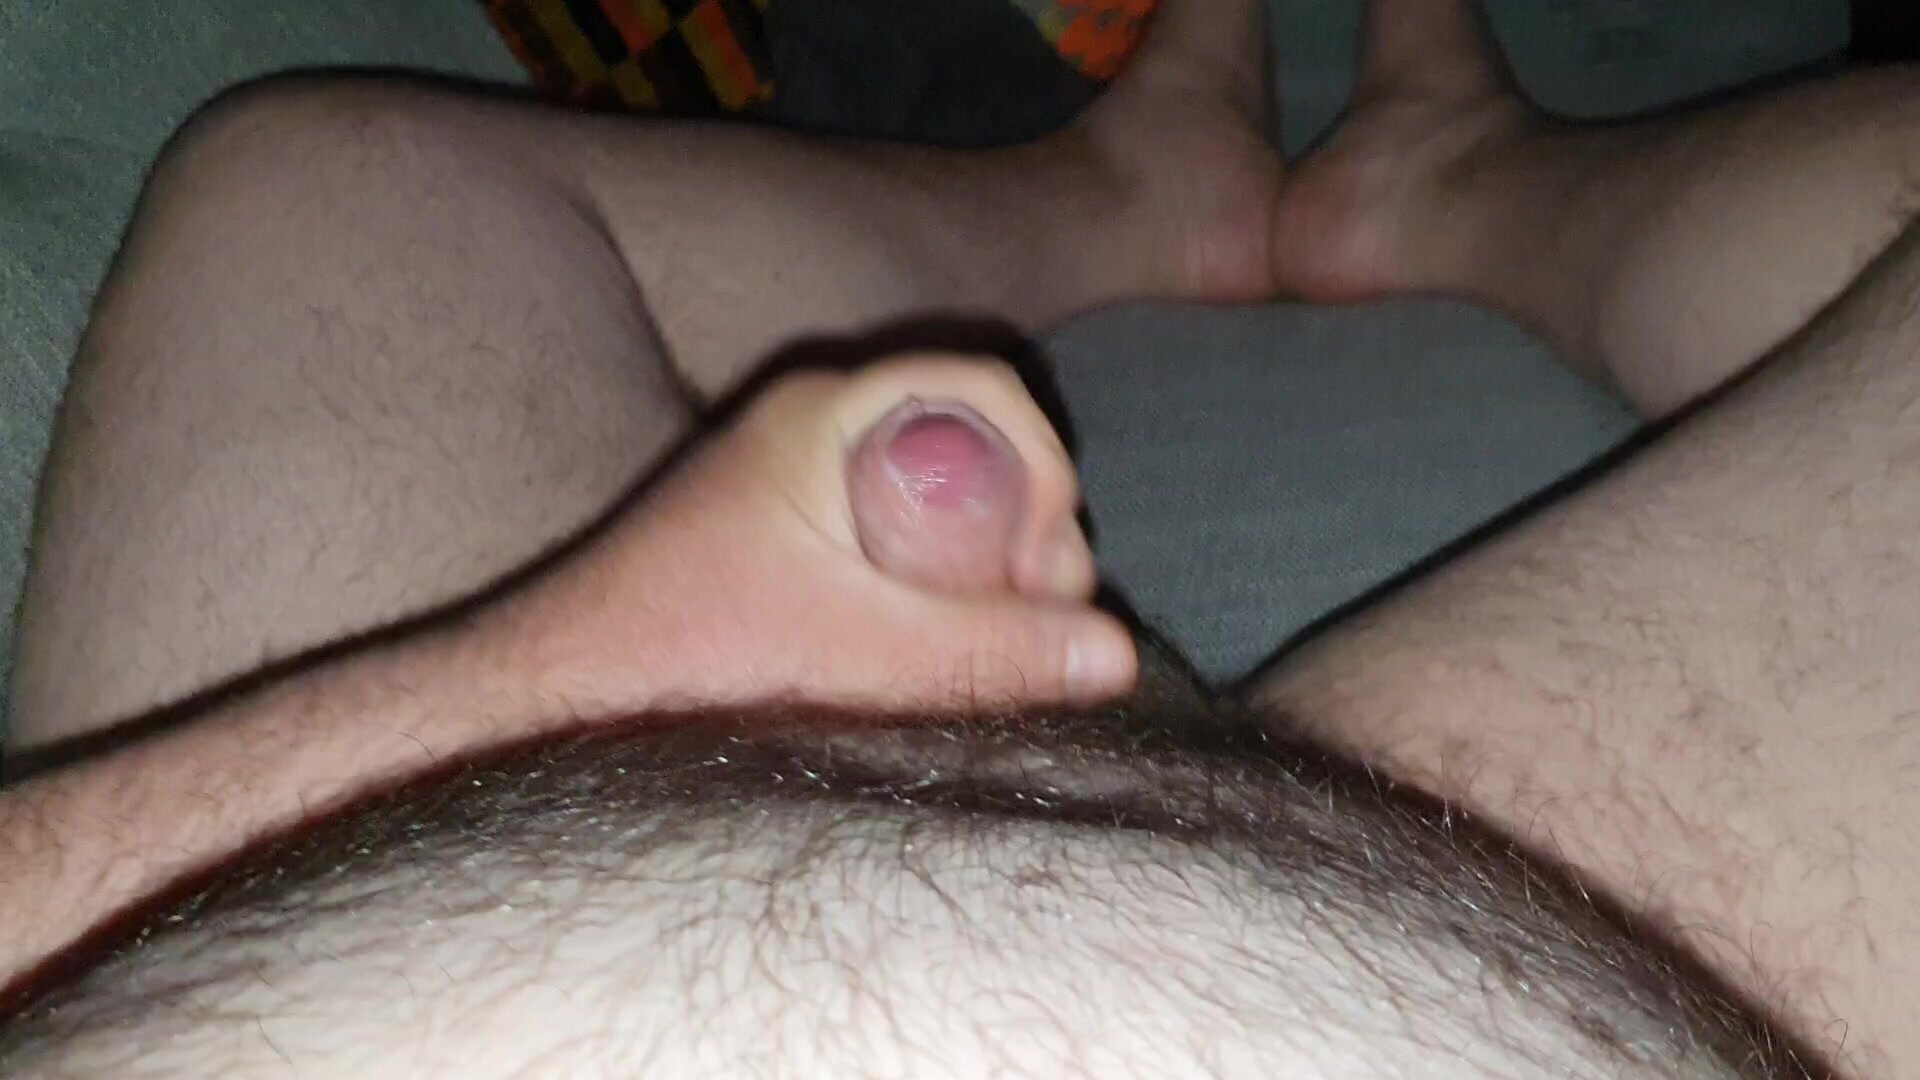 Just a quick wank